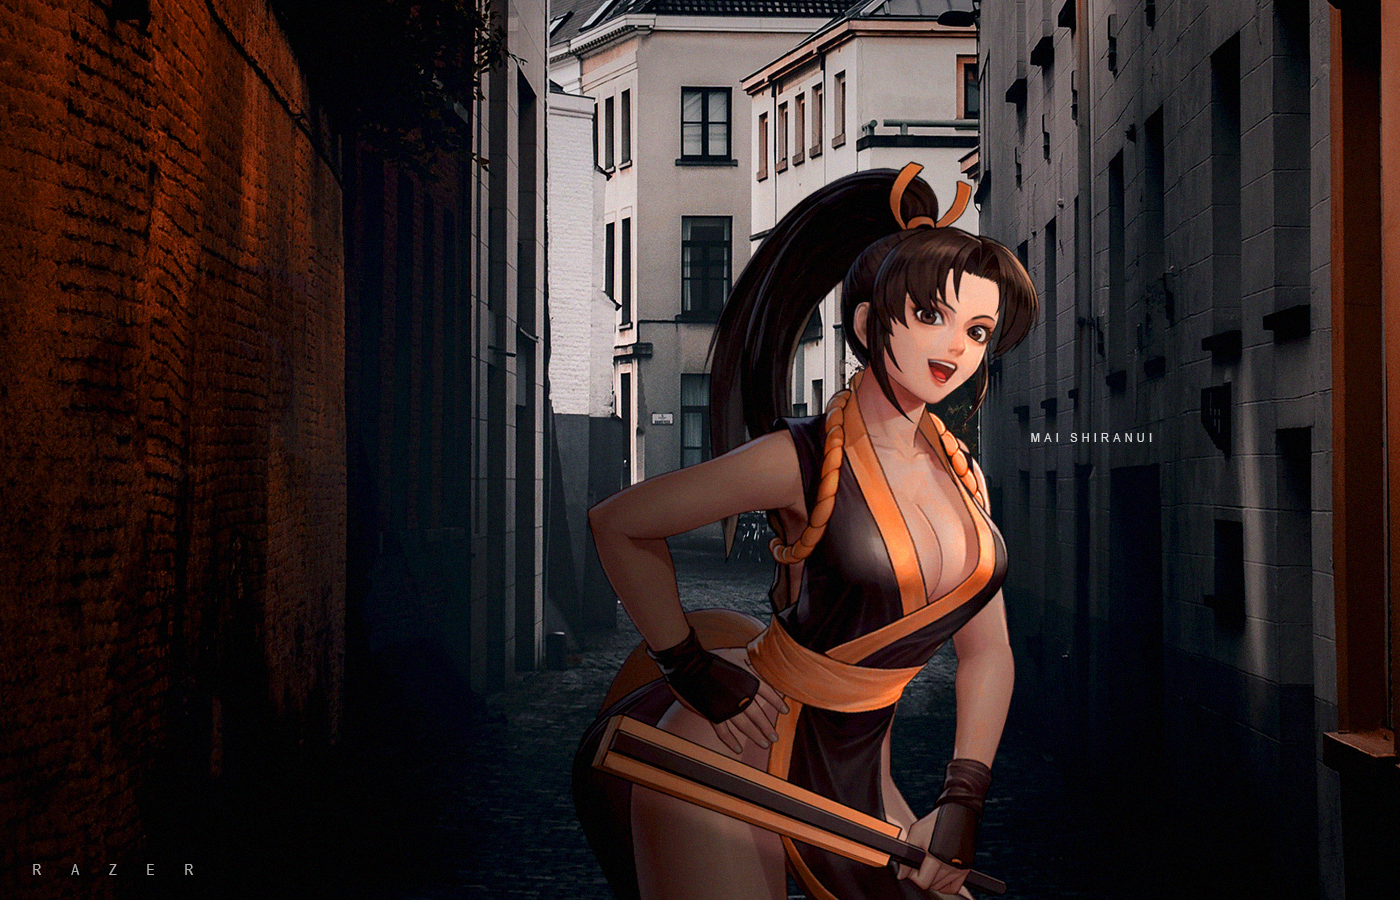 King Of Fighters Mai Shiranui Anime Girls Picture In Picture 1400x900